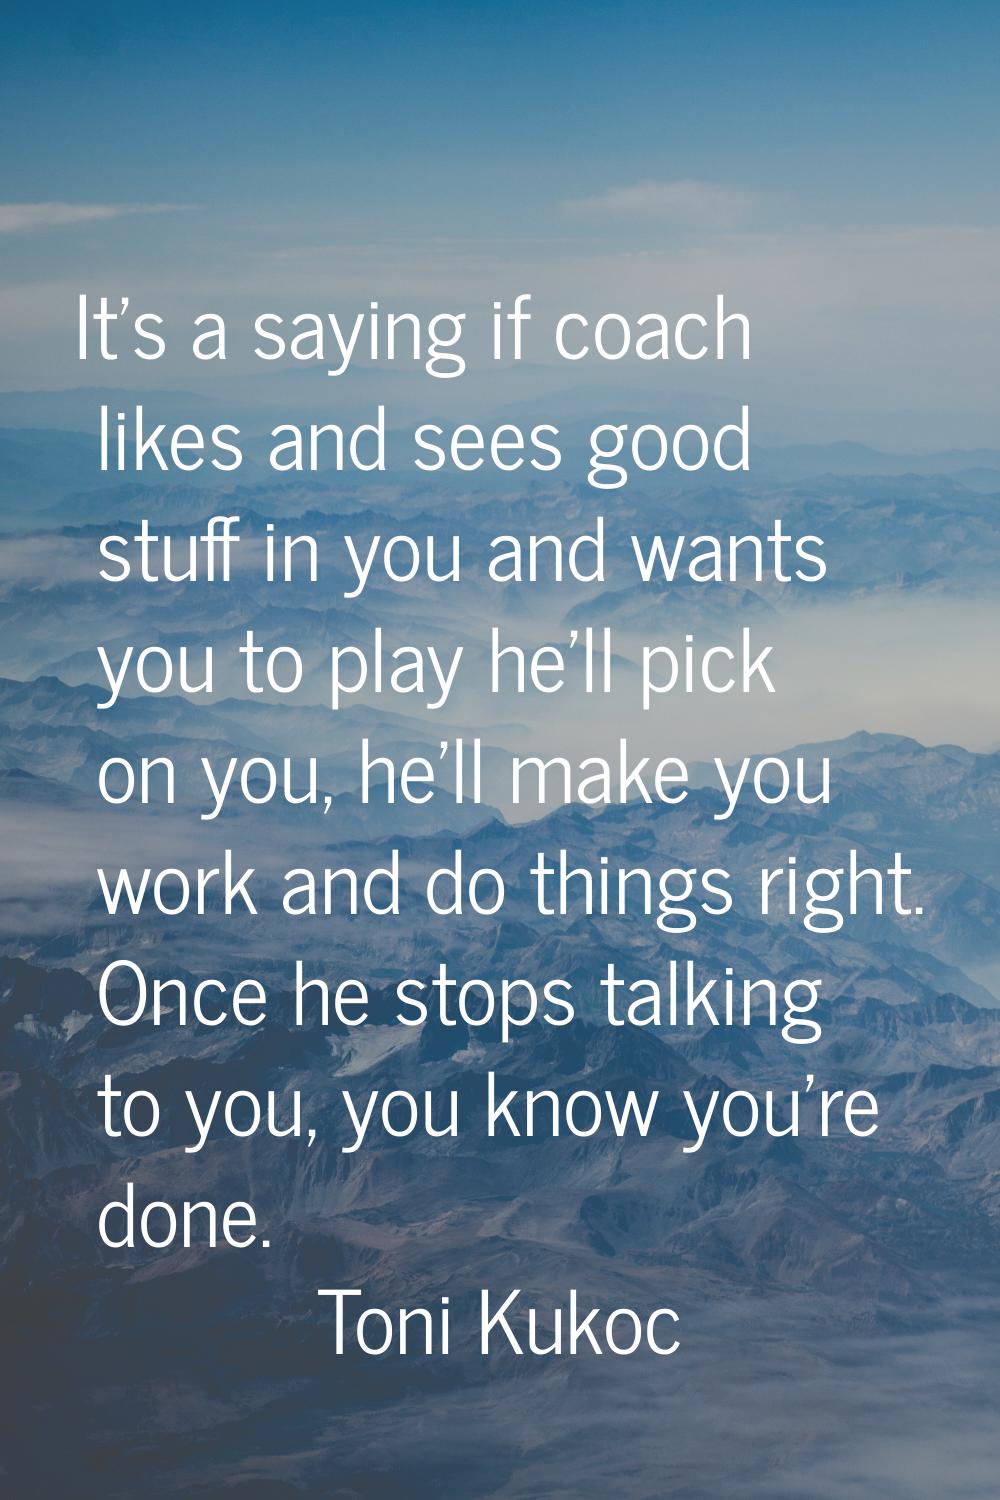 It's a saying if coach likes and sees good stuff in you and wants you to play he'll pick on you, he